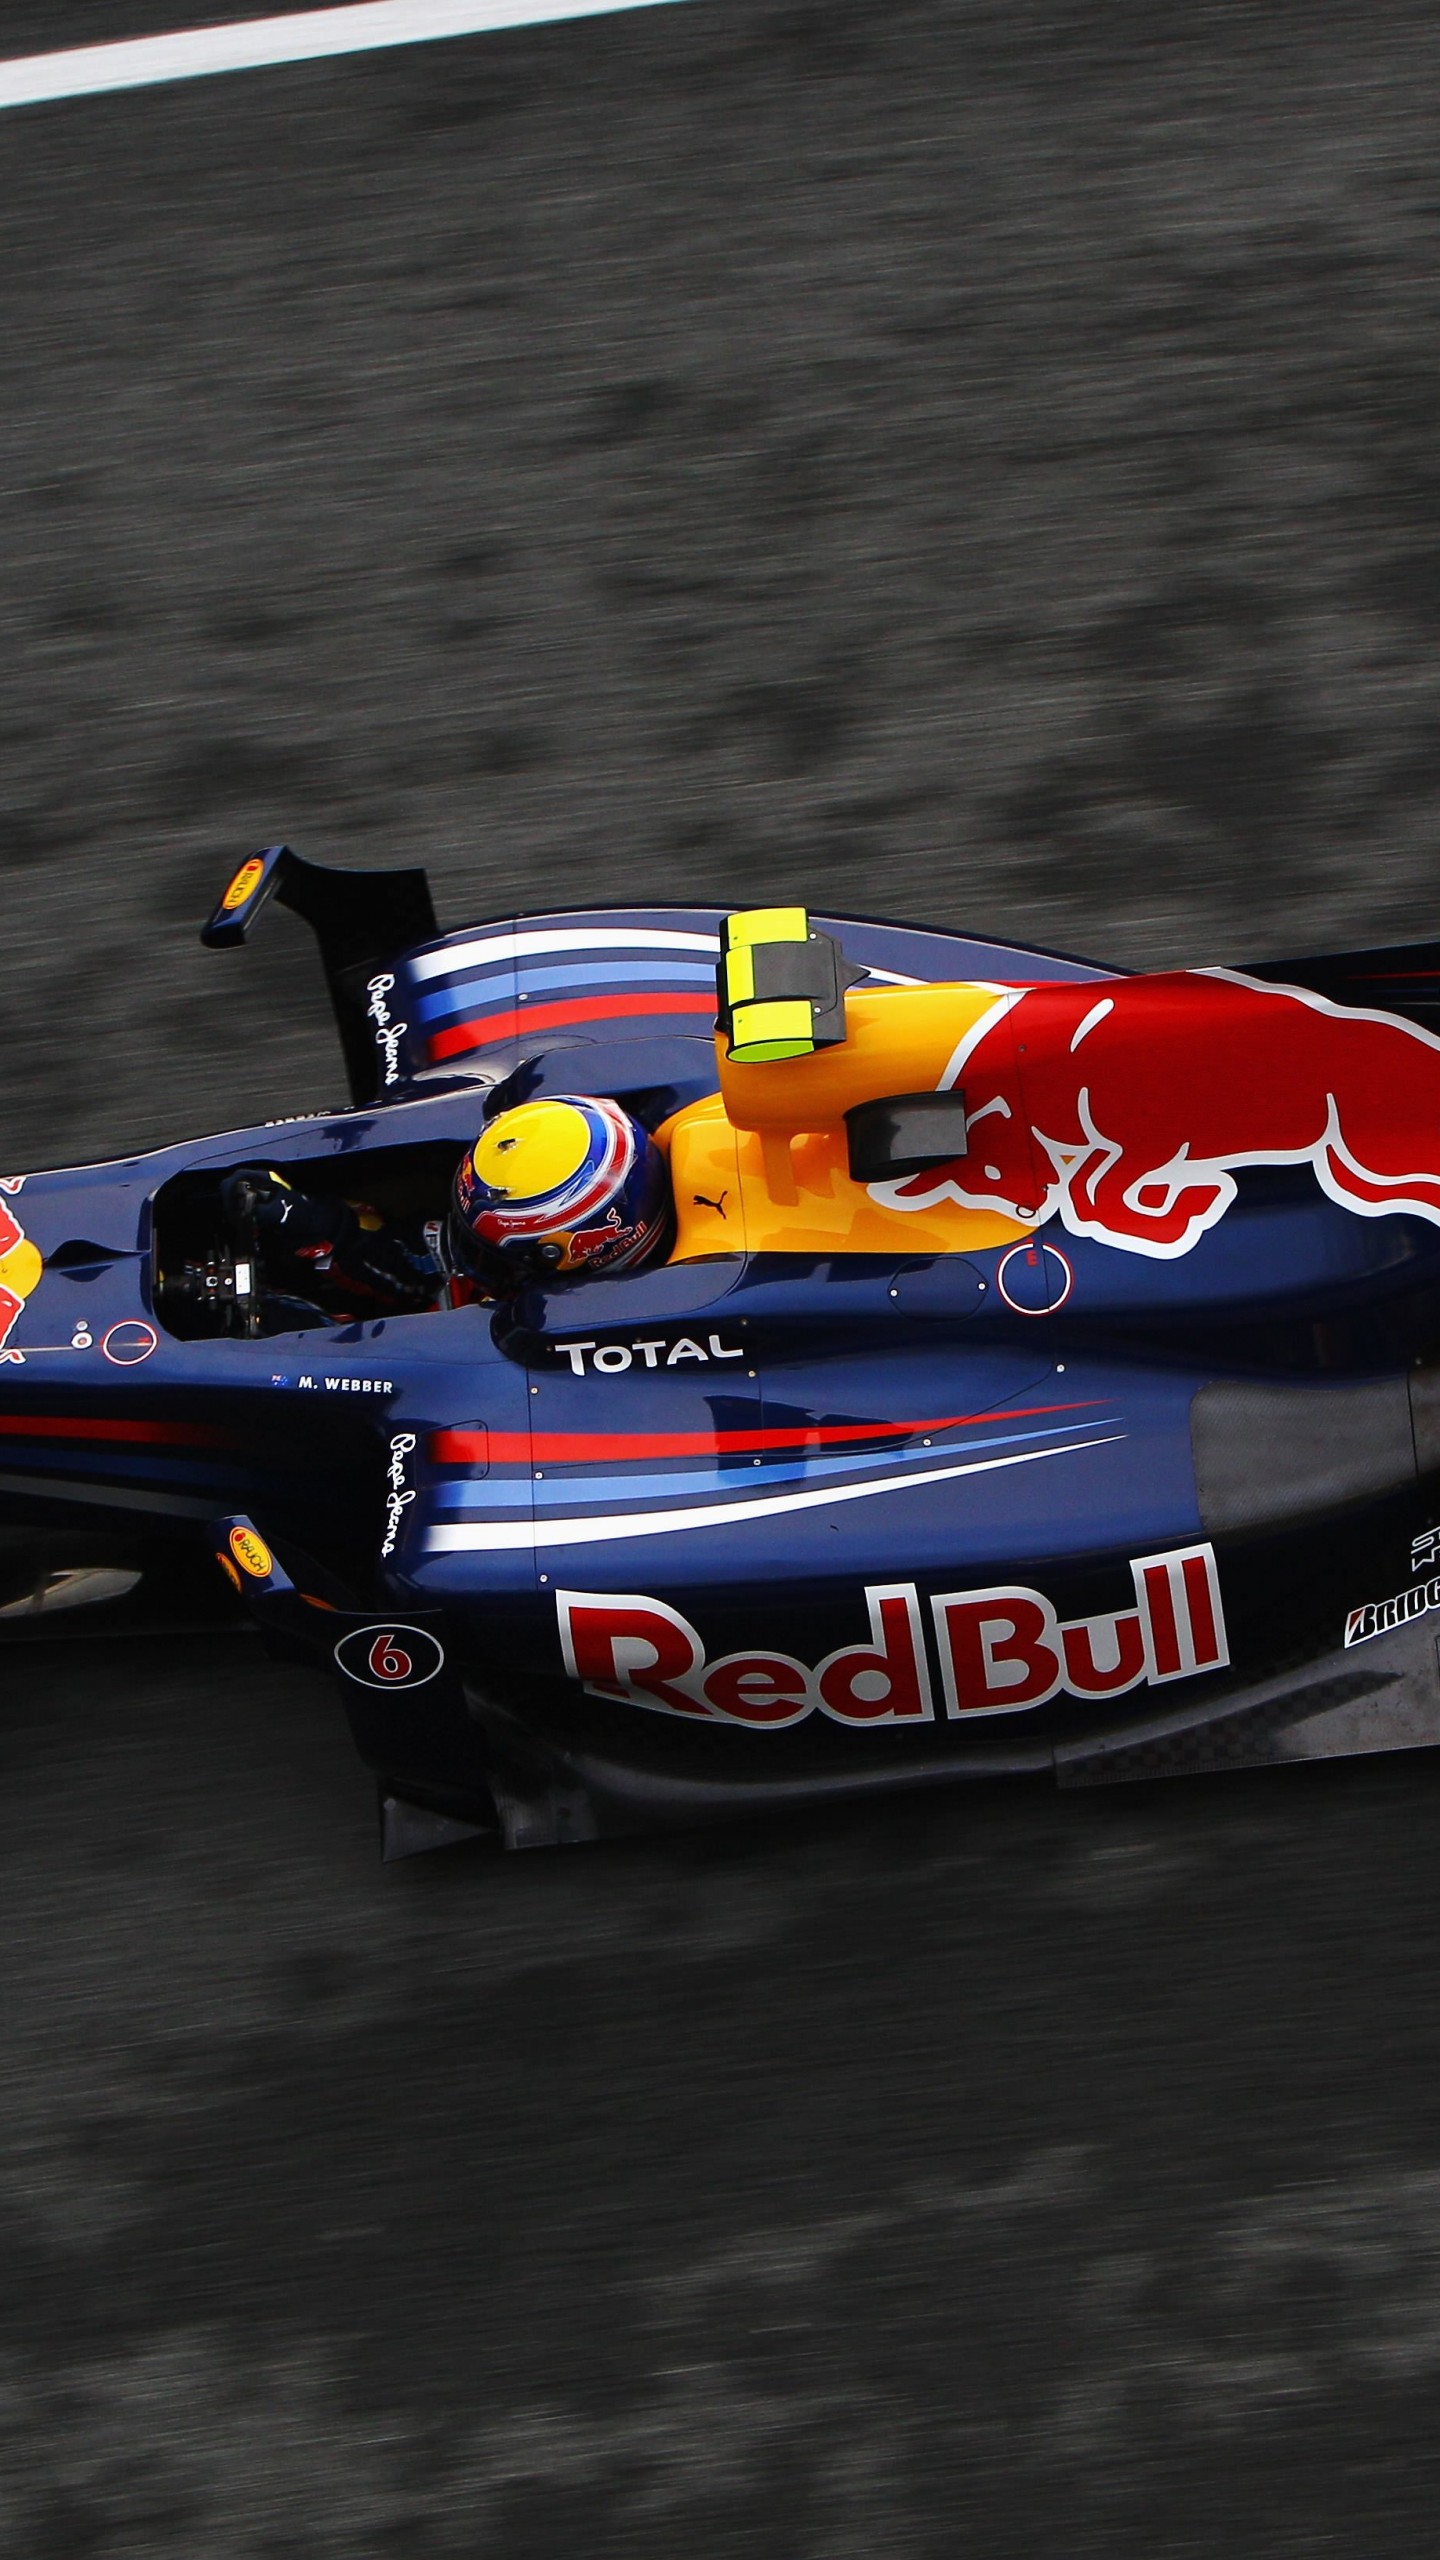 F1 Red Bull Team Wallpaper for SAMSUNG Galaxy Note 4